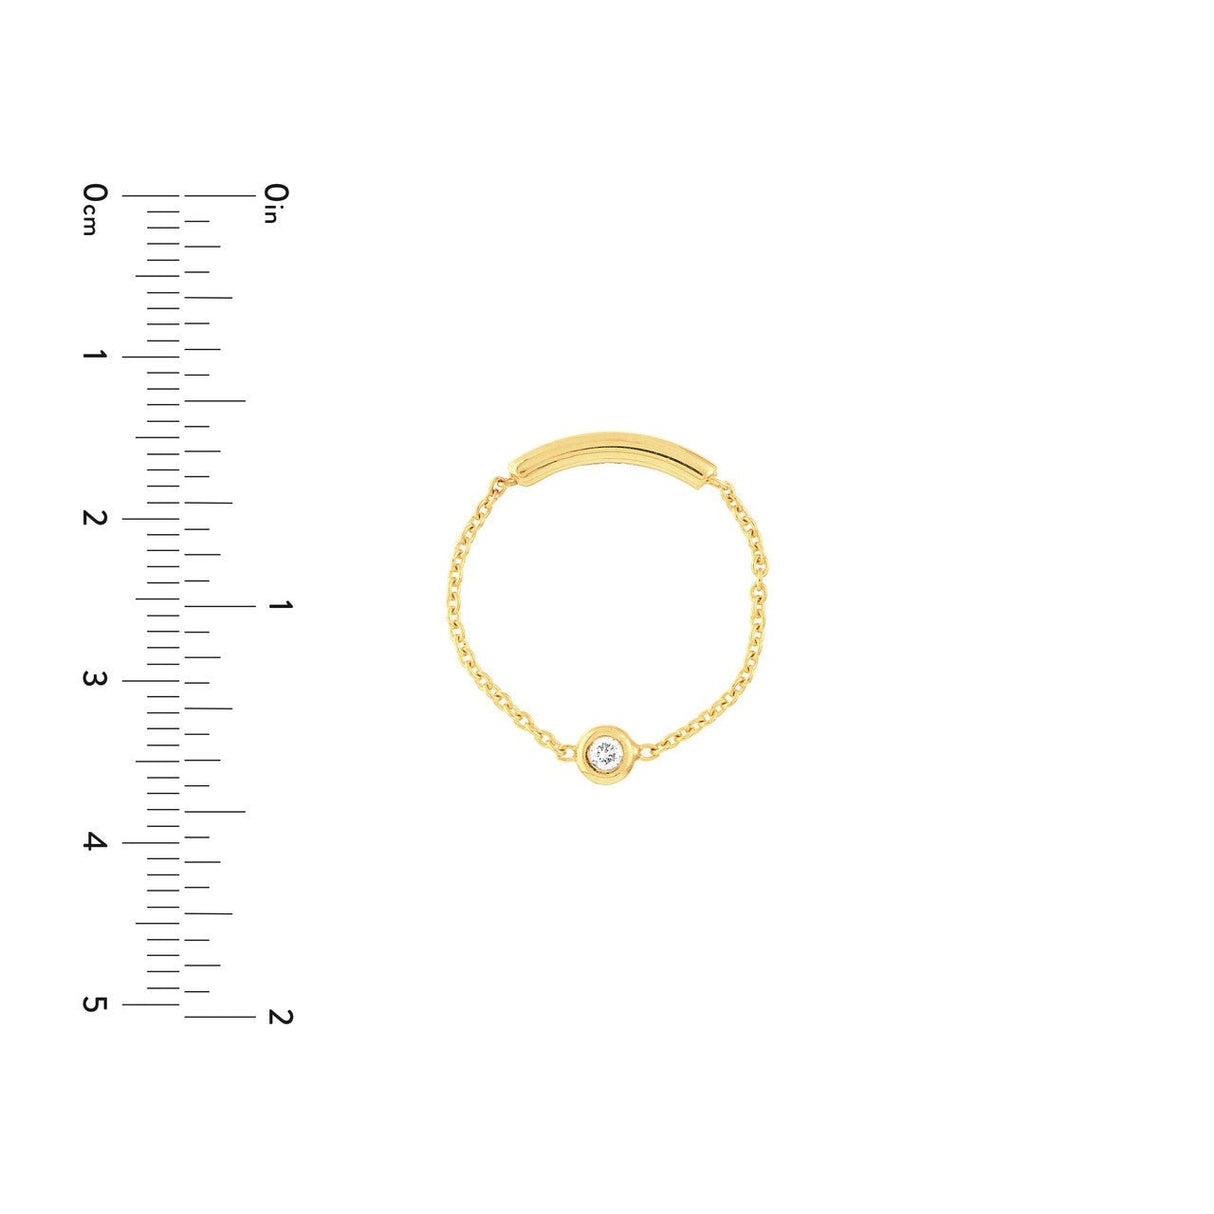  Diamond Bezel Chain Ring with a Sizing Bar. This eye-catching ring is crafted from high-quality materials, boasting a sleek and modern design that is perfect for everyday wear. The centerpiece of the ring is a beautiful 3pt diamond, securely held in place by a chic bezel setting. The chain link band adds a unique touch of style and sophistication, creating a truly one-of-a-kind piece. The Sizing Bar ensures a perfect fit, making this ring comfortable and easy to wear. 